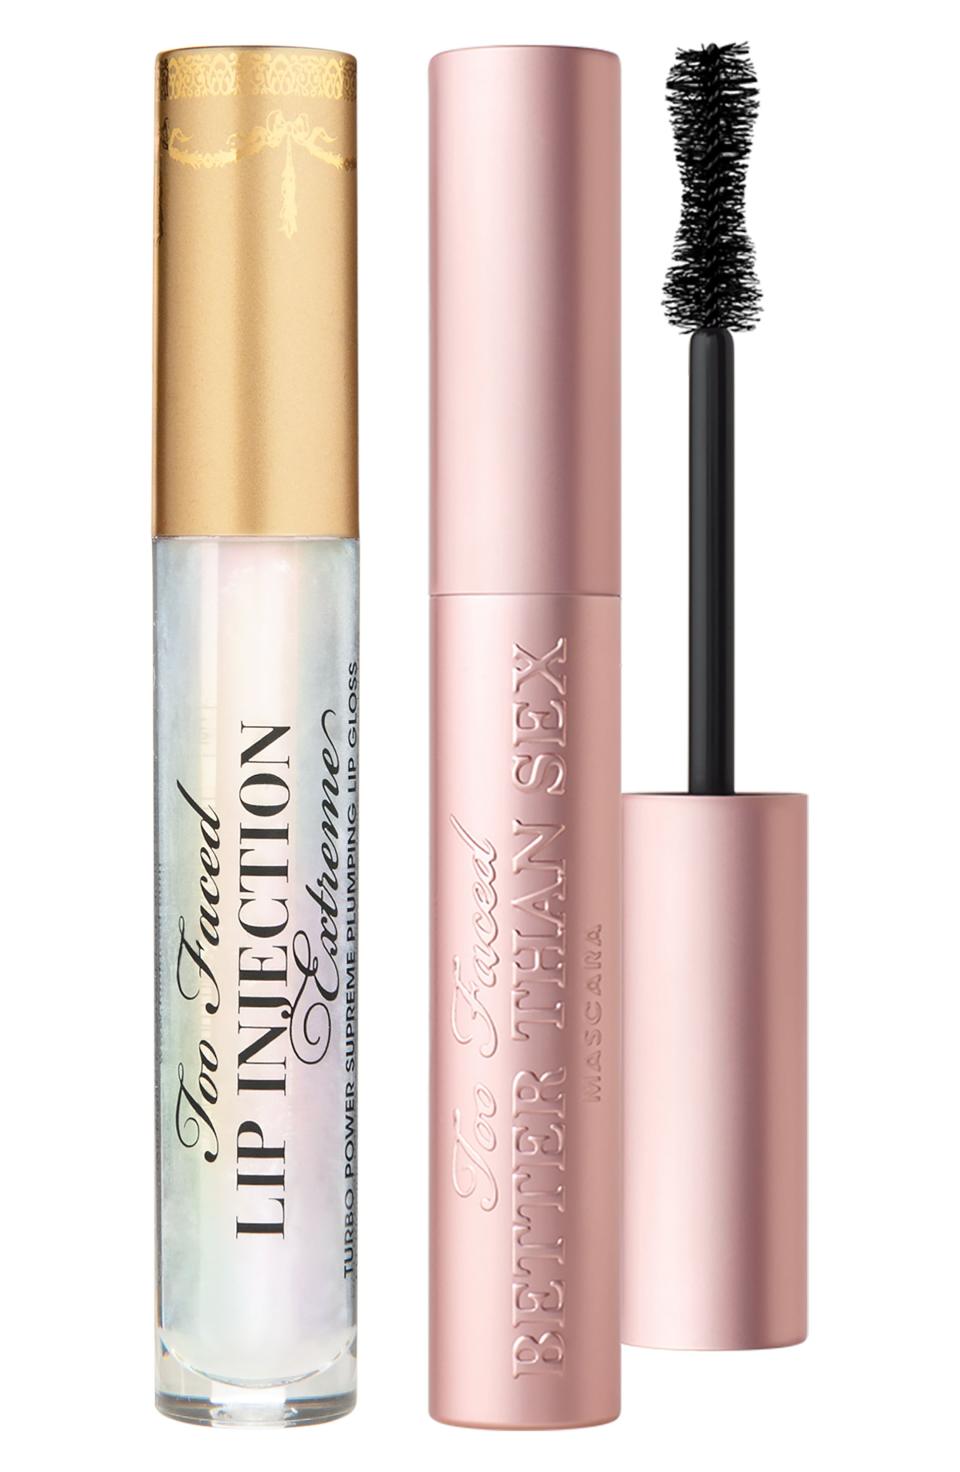 13) Plump Lips & Sexy Lashes Duo